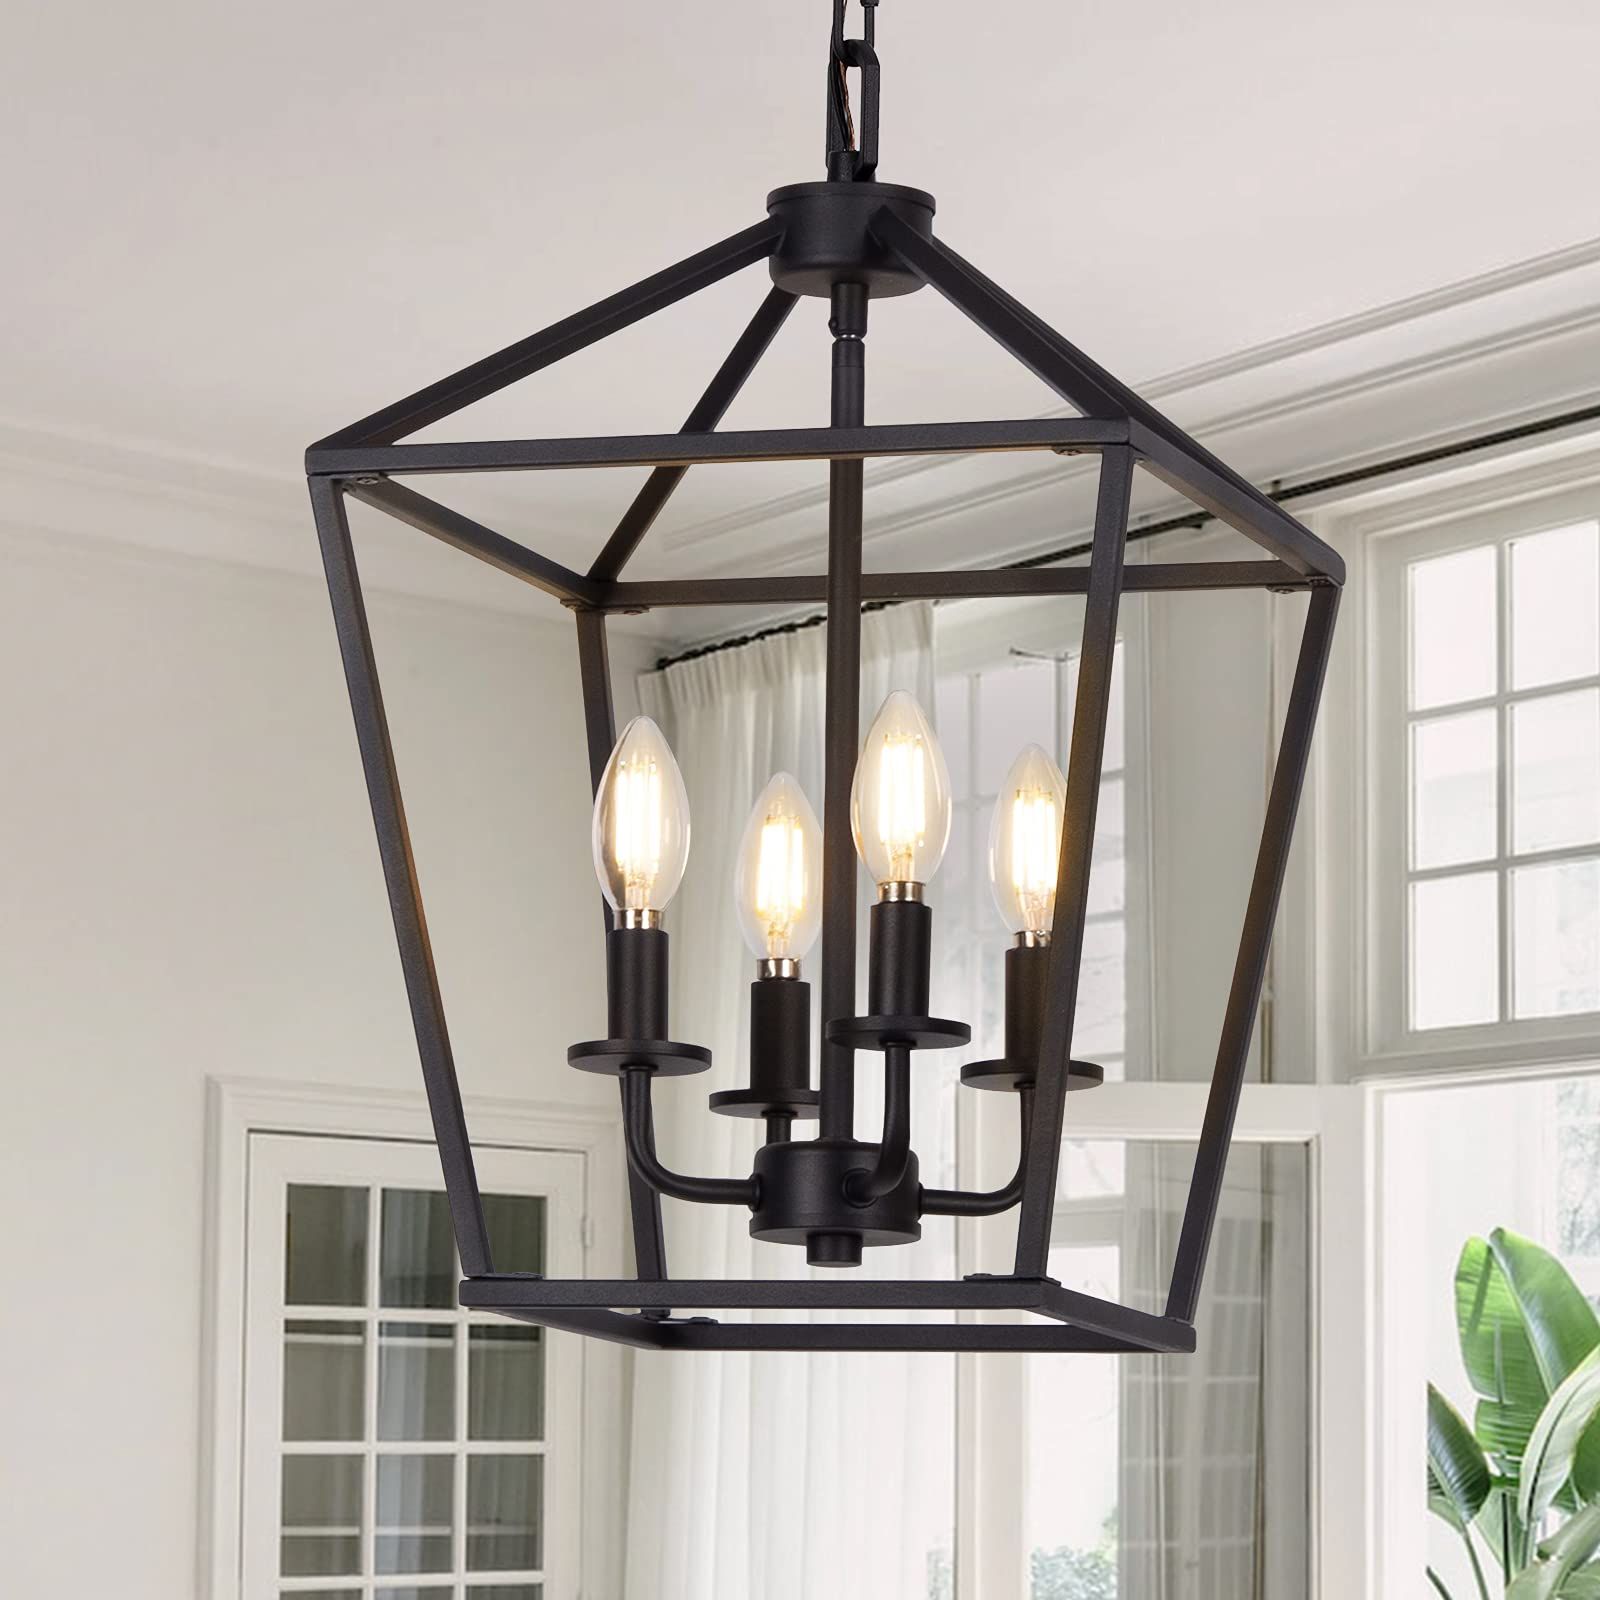 Fashionable Four Light Lantern Chandeliers In 4 Light Pendant Lighting, Industrial Ceiling Light Black Lantern Chandelier  With Farmhouse Metal Cage Adjustable Height Rustic Geometric Hanging Light  E12 Base For Kitchen Island, Bedroom Or Entryway – – Amazon (View 2 of 10)